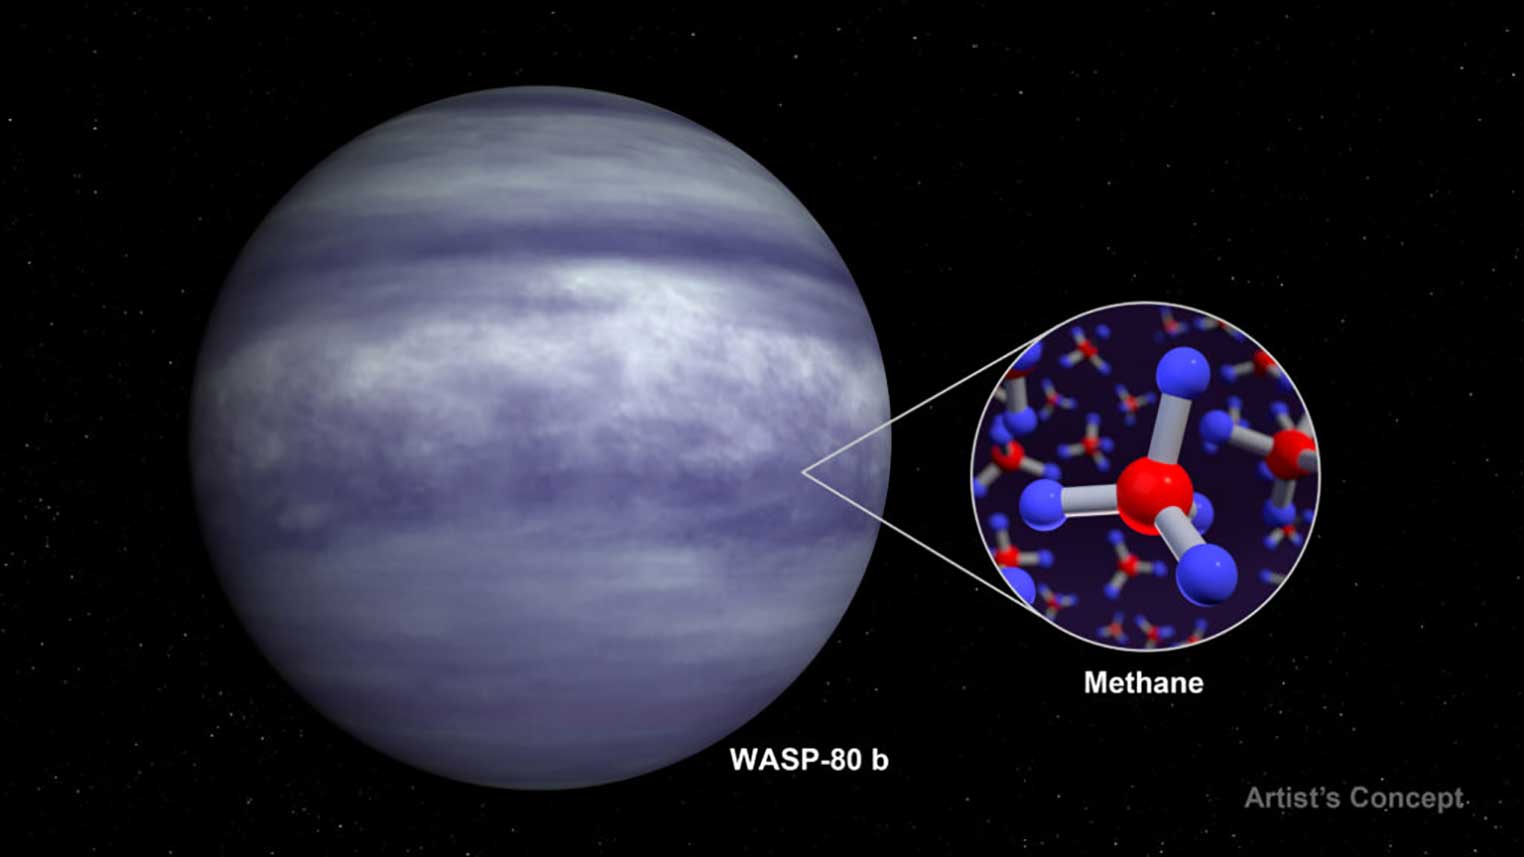 Webb identified methane and water vapor in exoplanets’ atmosphere thumbnail